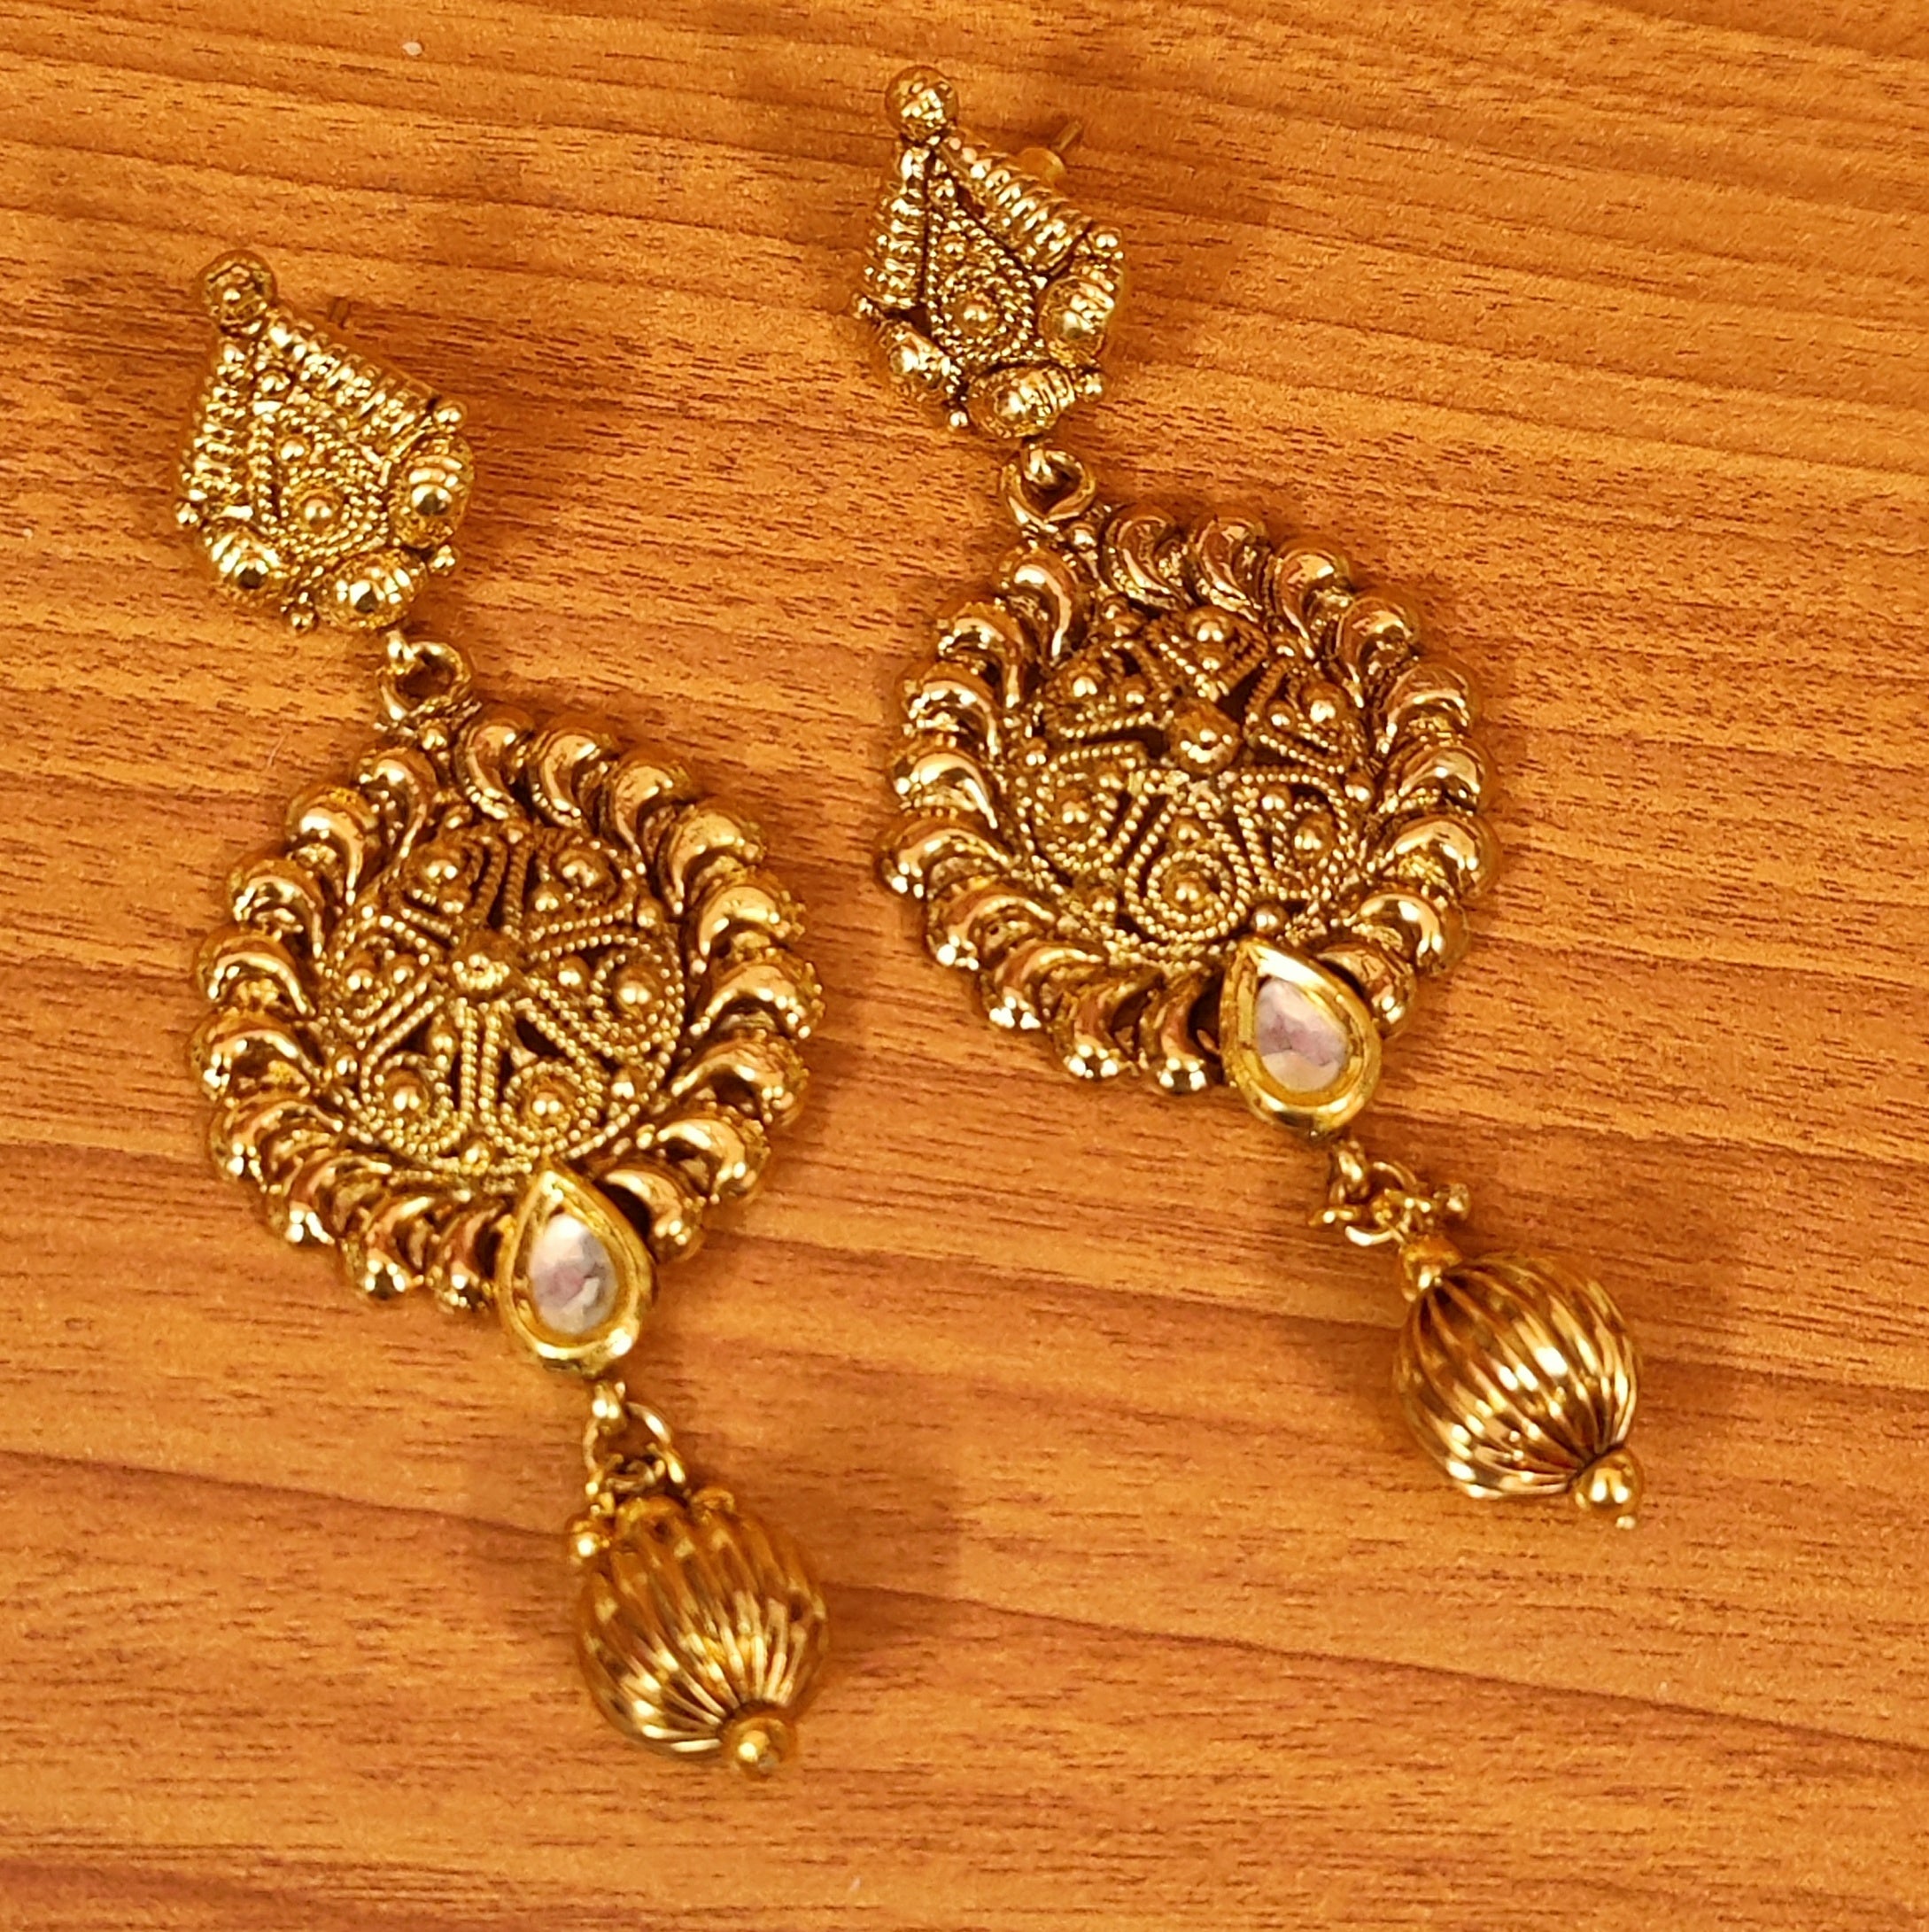 Statement flower black Ethnic Antique Gold tone earrings at ₹1650 | Azilaa